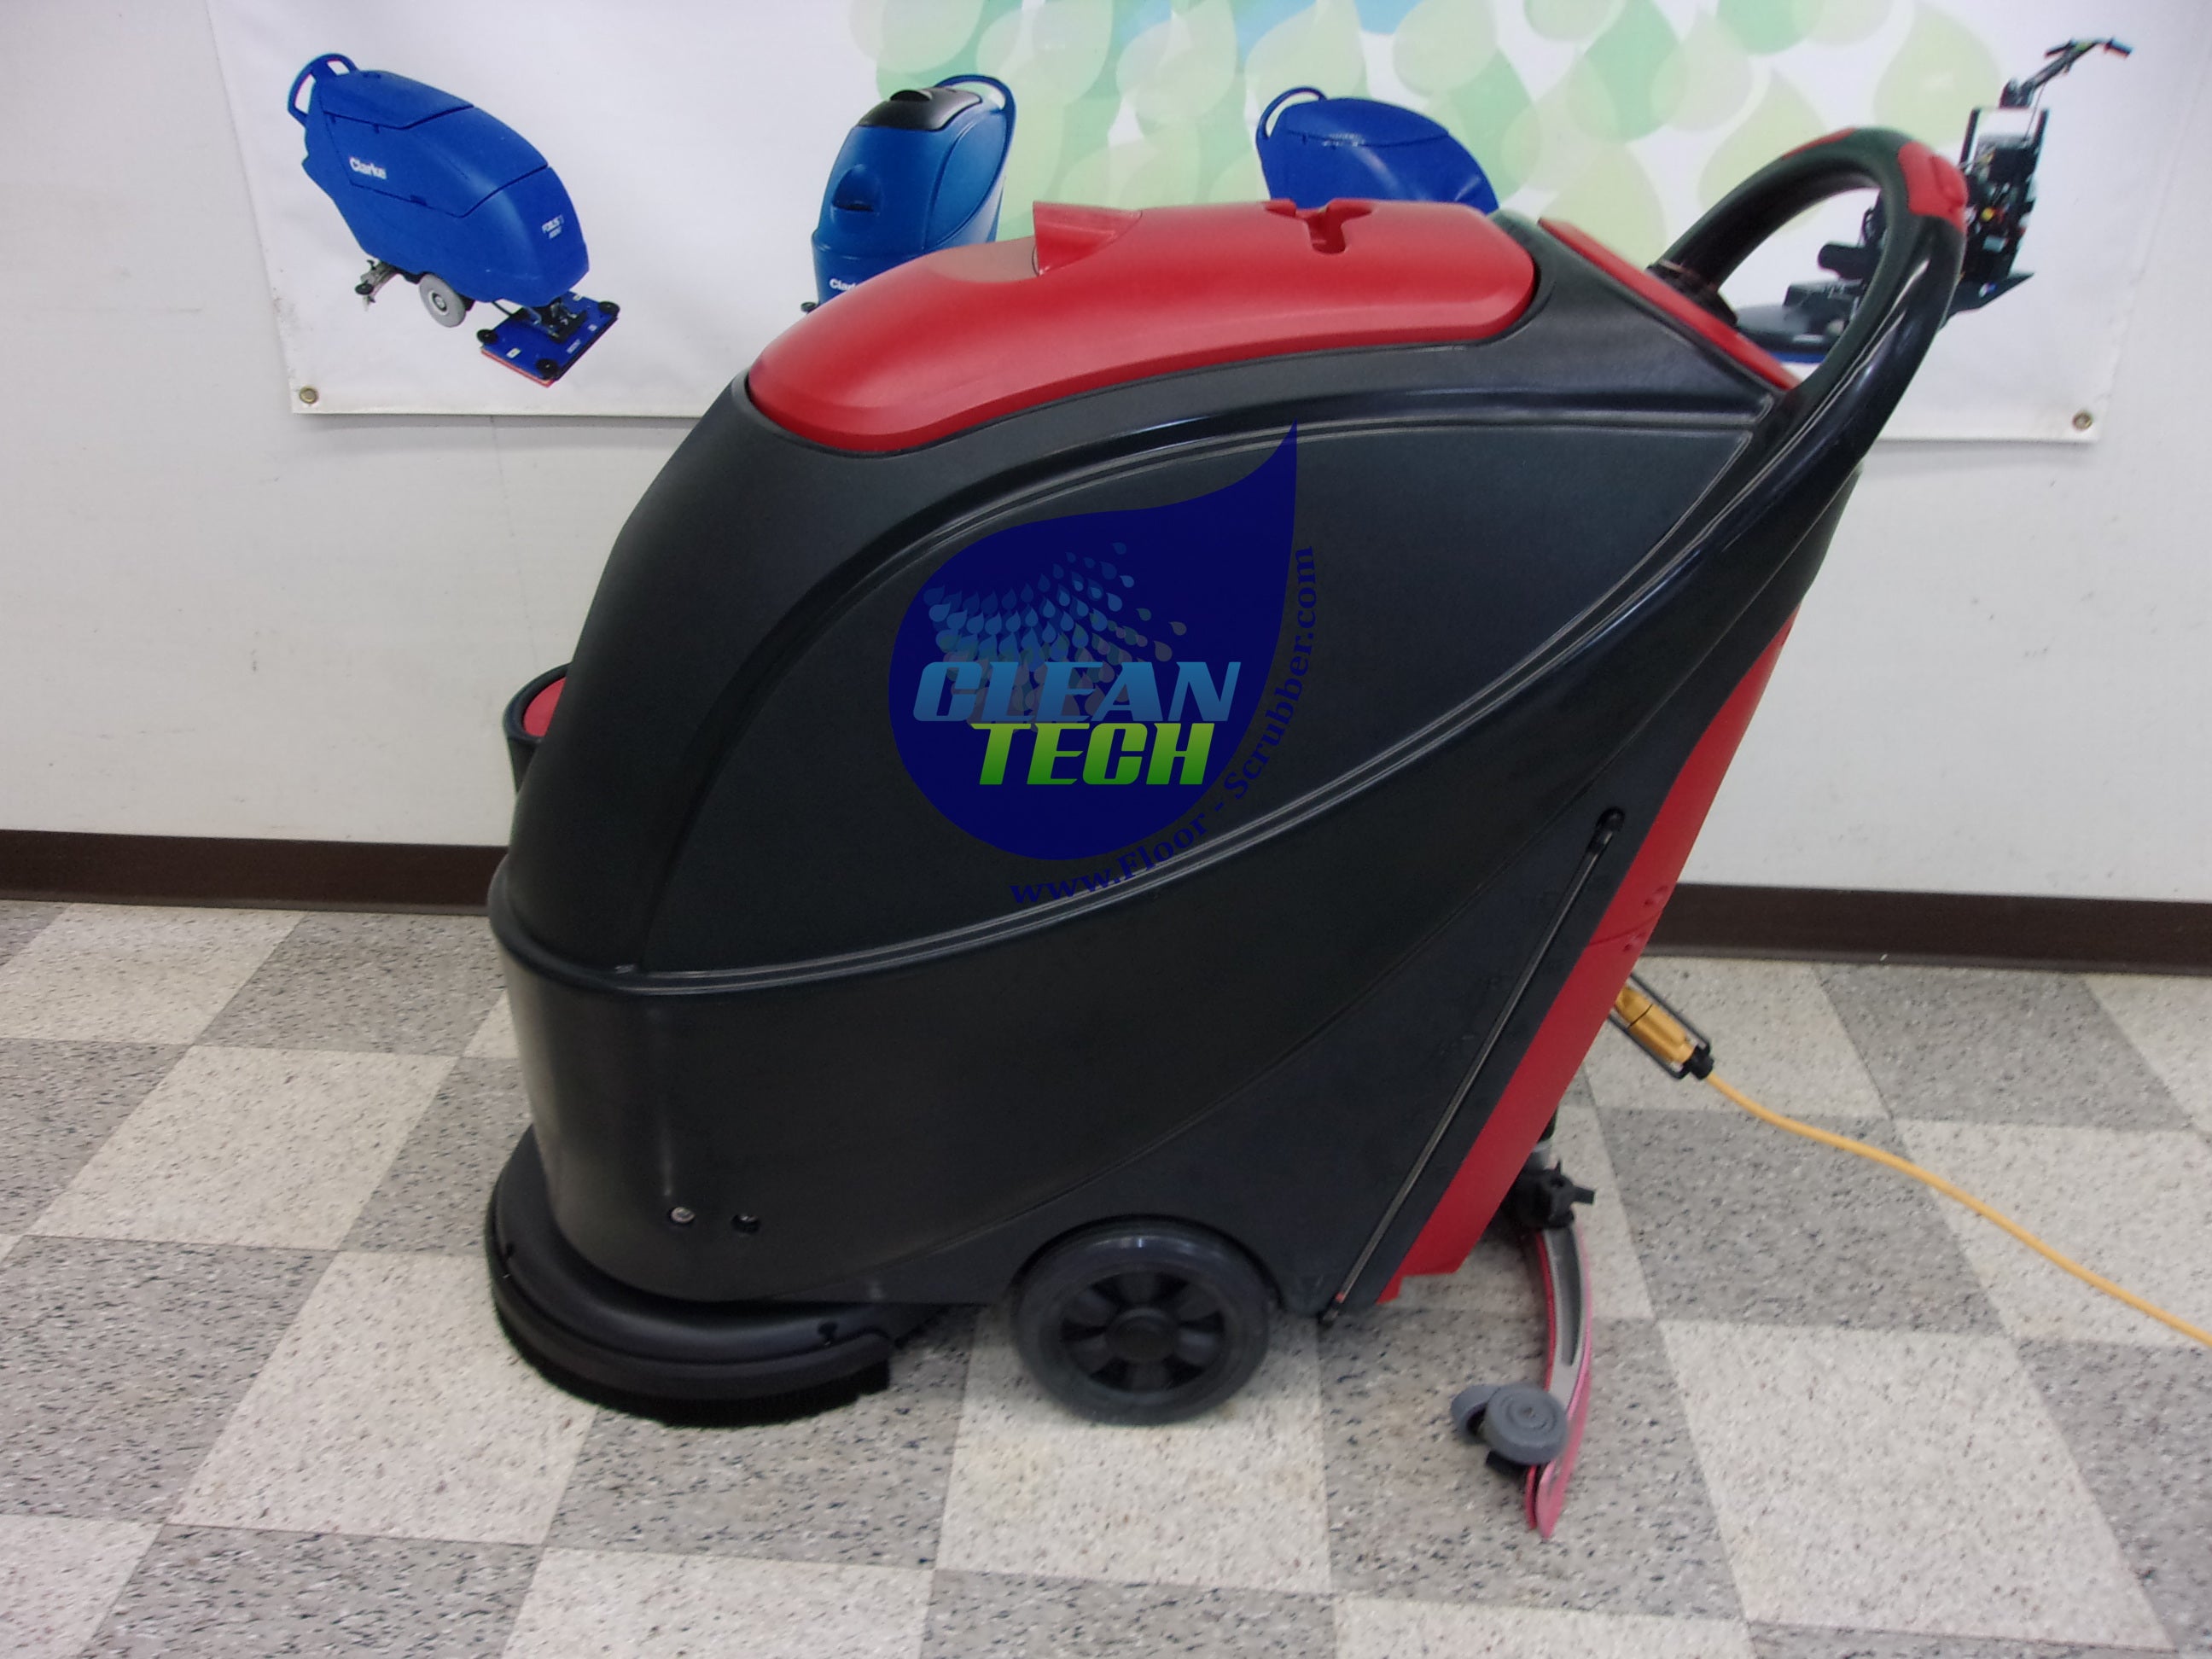 New Viper AS430C 17 Electric Corded Small Automatic Floor Scrubber